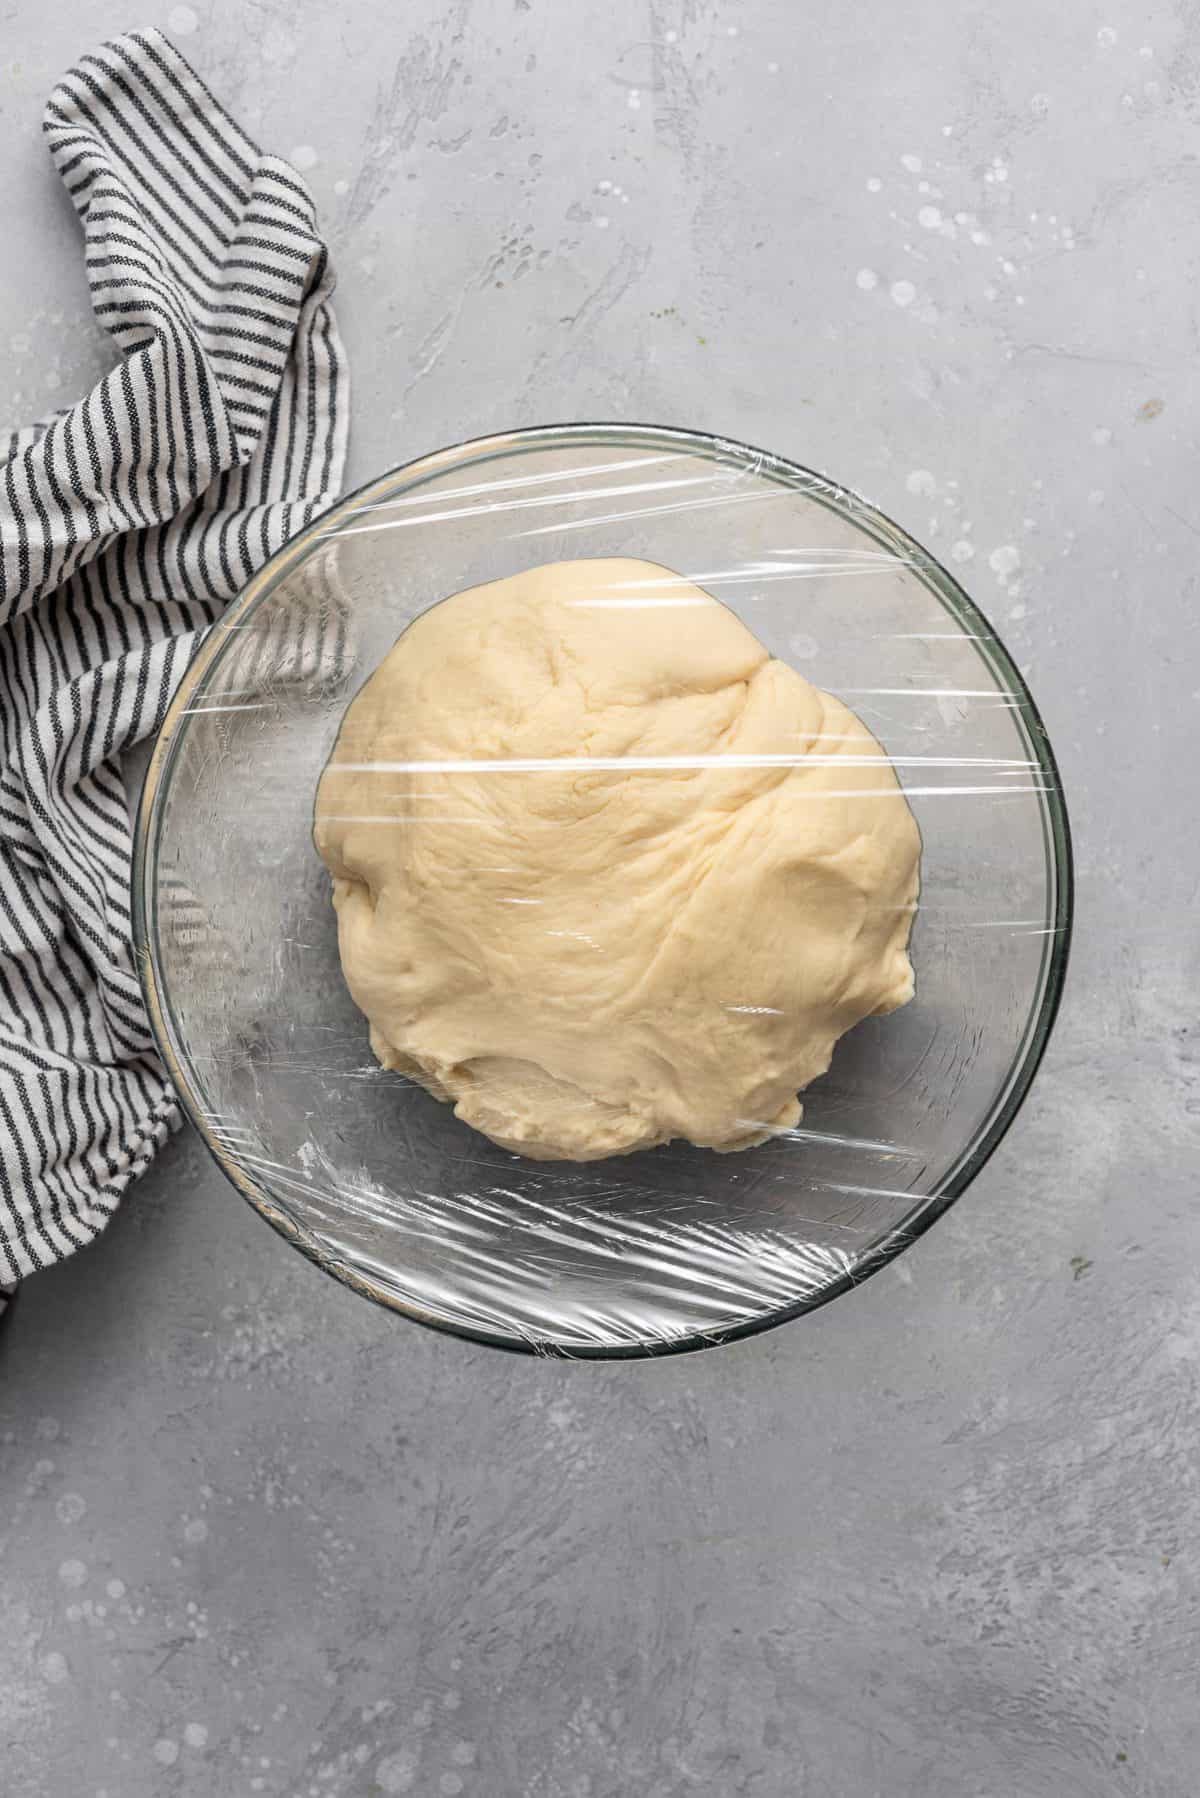 dough in a glass bowl waiting to rise